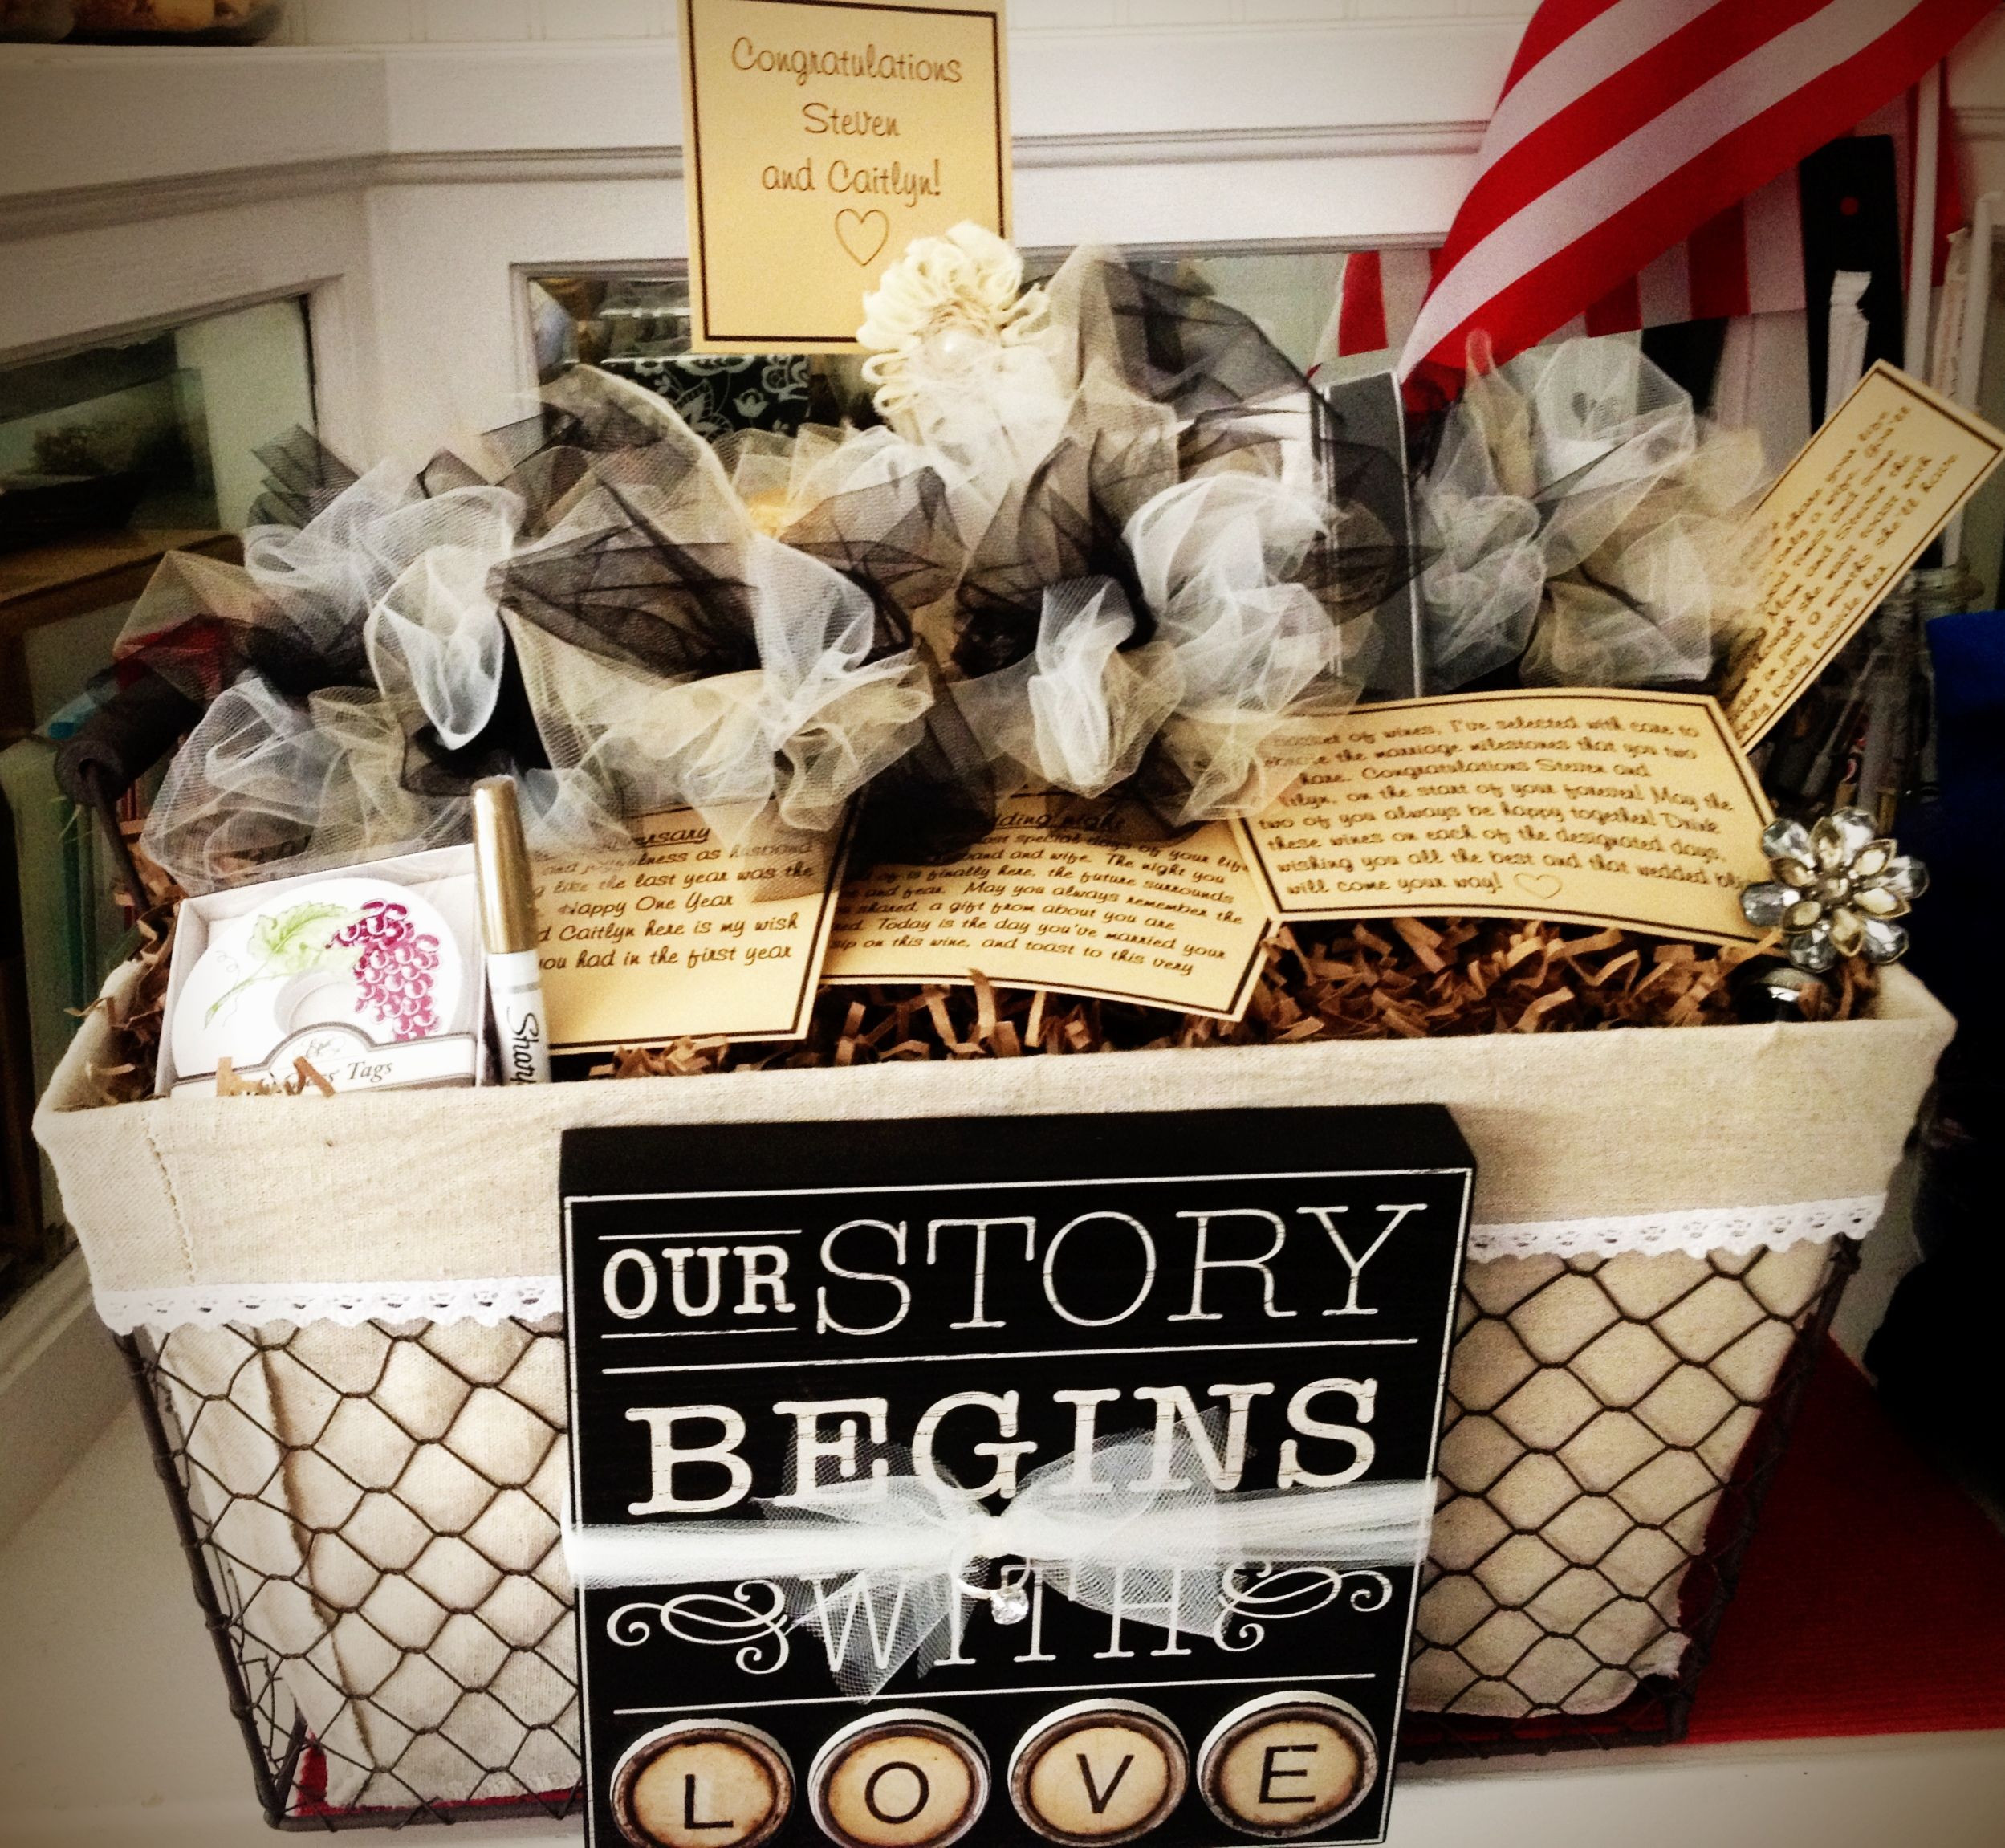 Creative Bridal Shower Gift Basket Ideas
 Wine Basket for a year of firsts